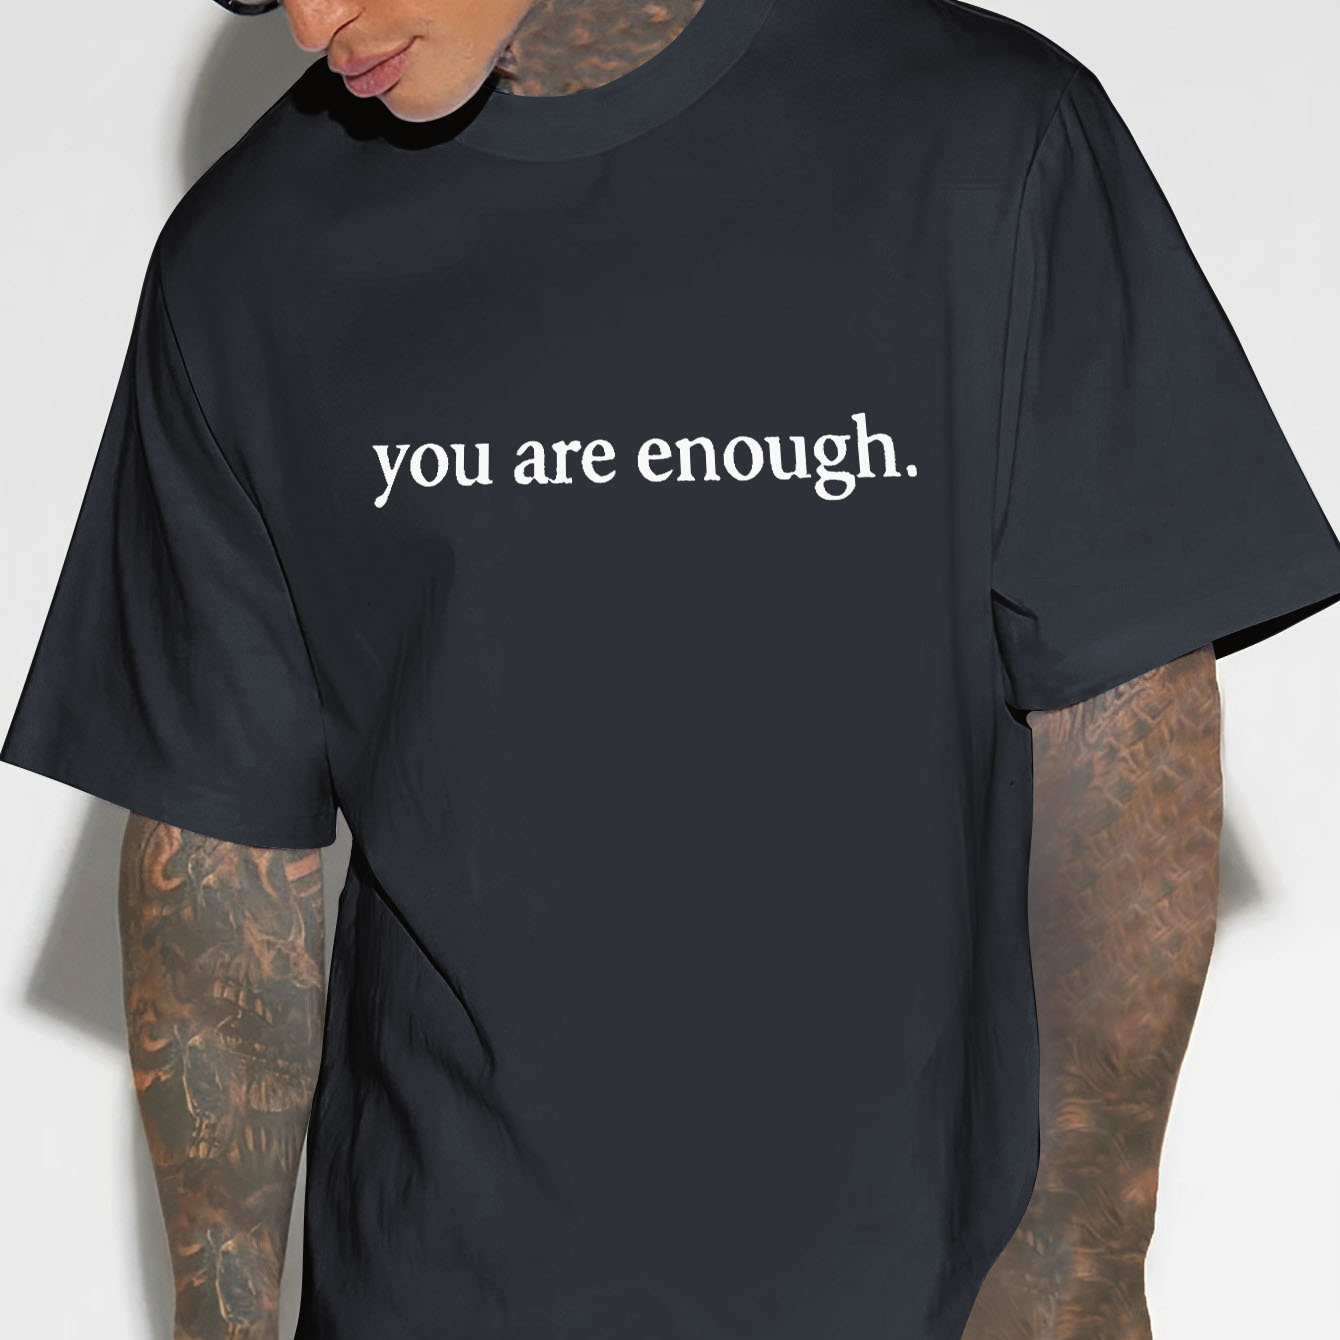 

You Are Enough Creative Print Men's Casual T-shirt, Summer Fashion Crew Neck Short Sleeve Top, Modern Streetwear Style For Men